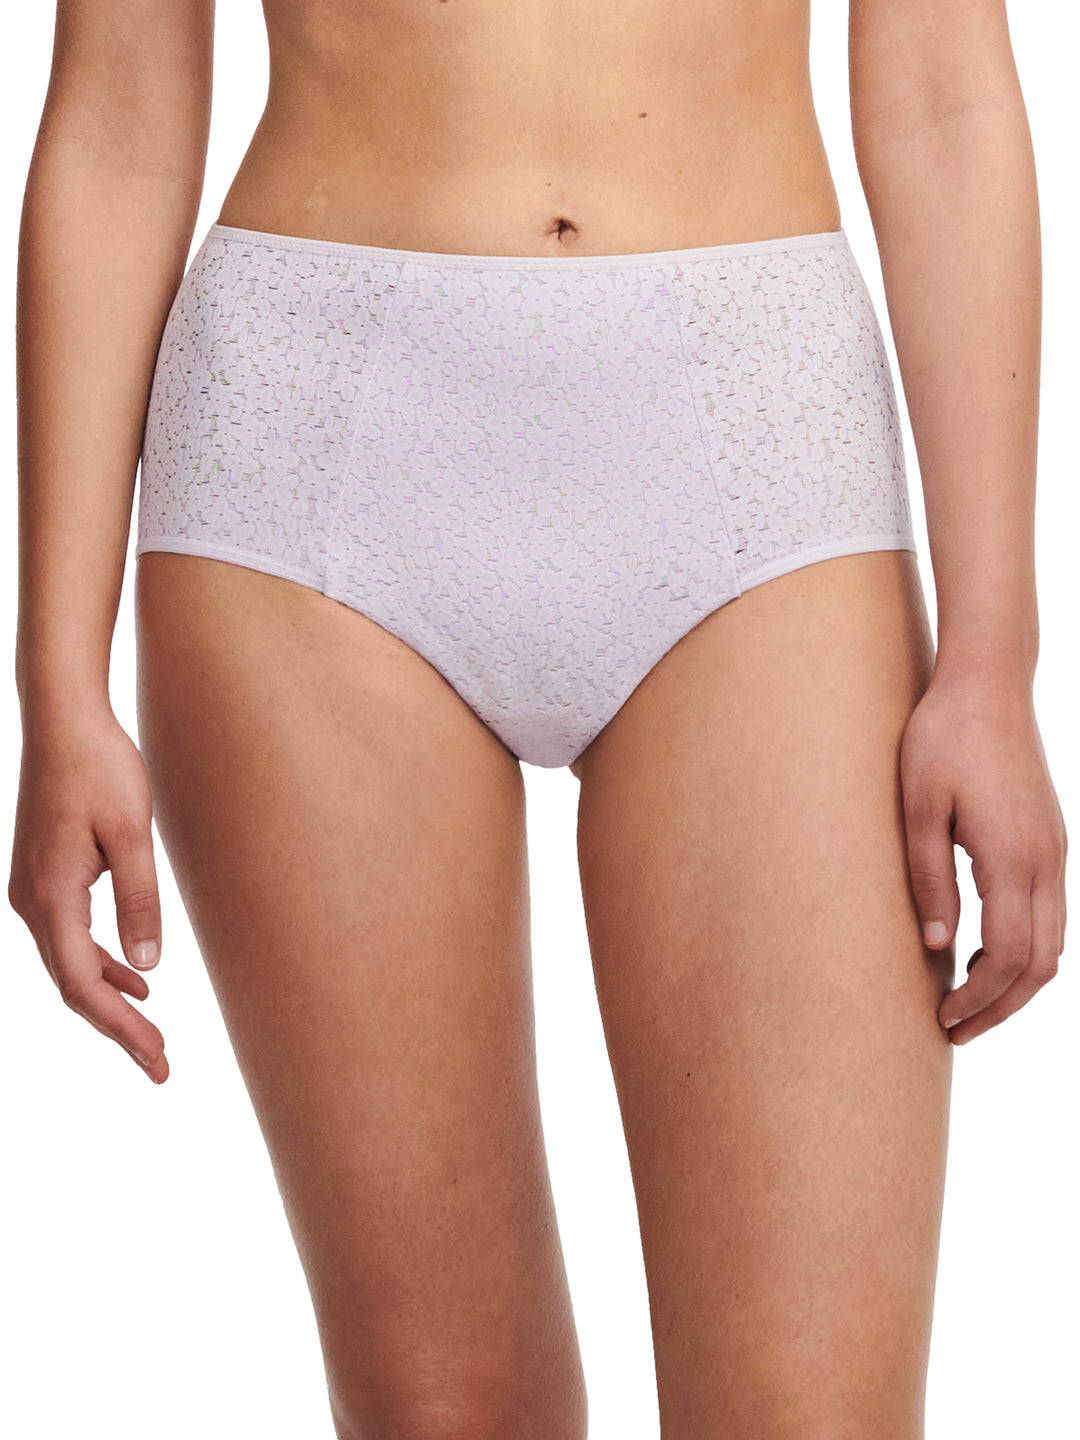 Chantelle Easyfeel – Norah High-Waisted Covering Full Brief Evening Haze